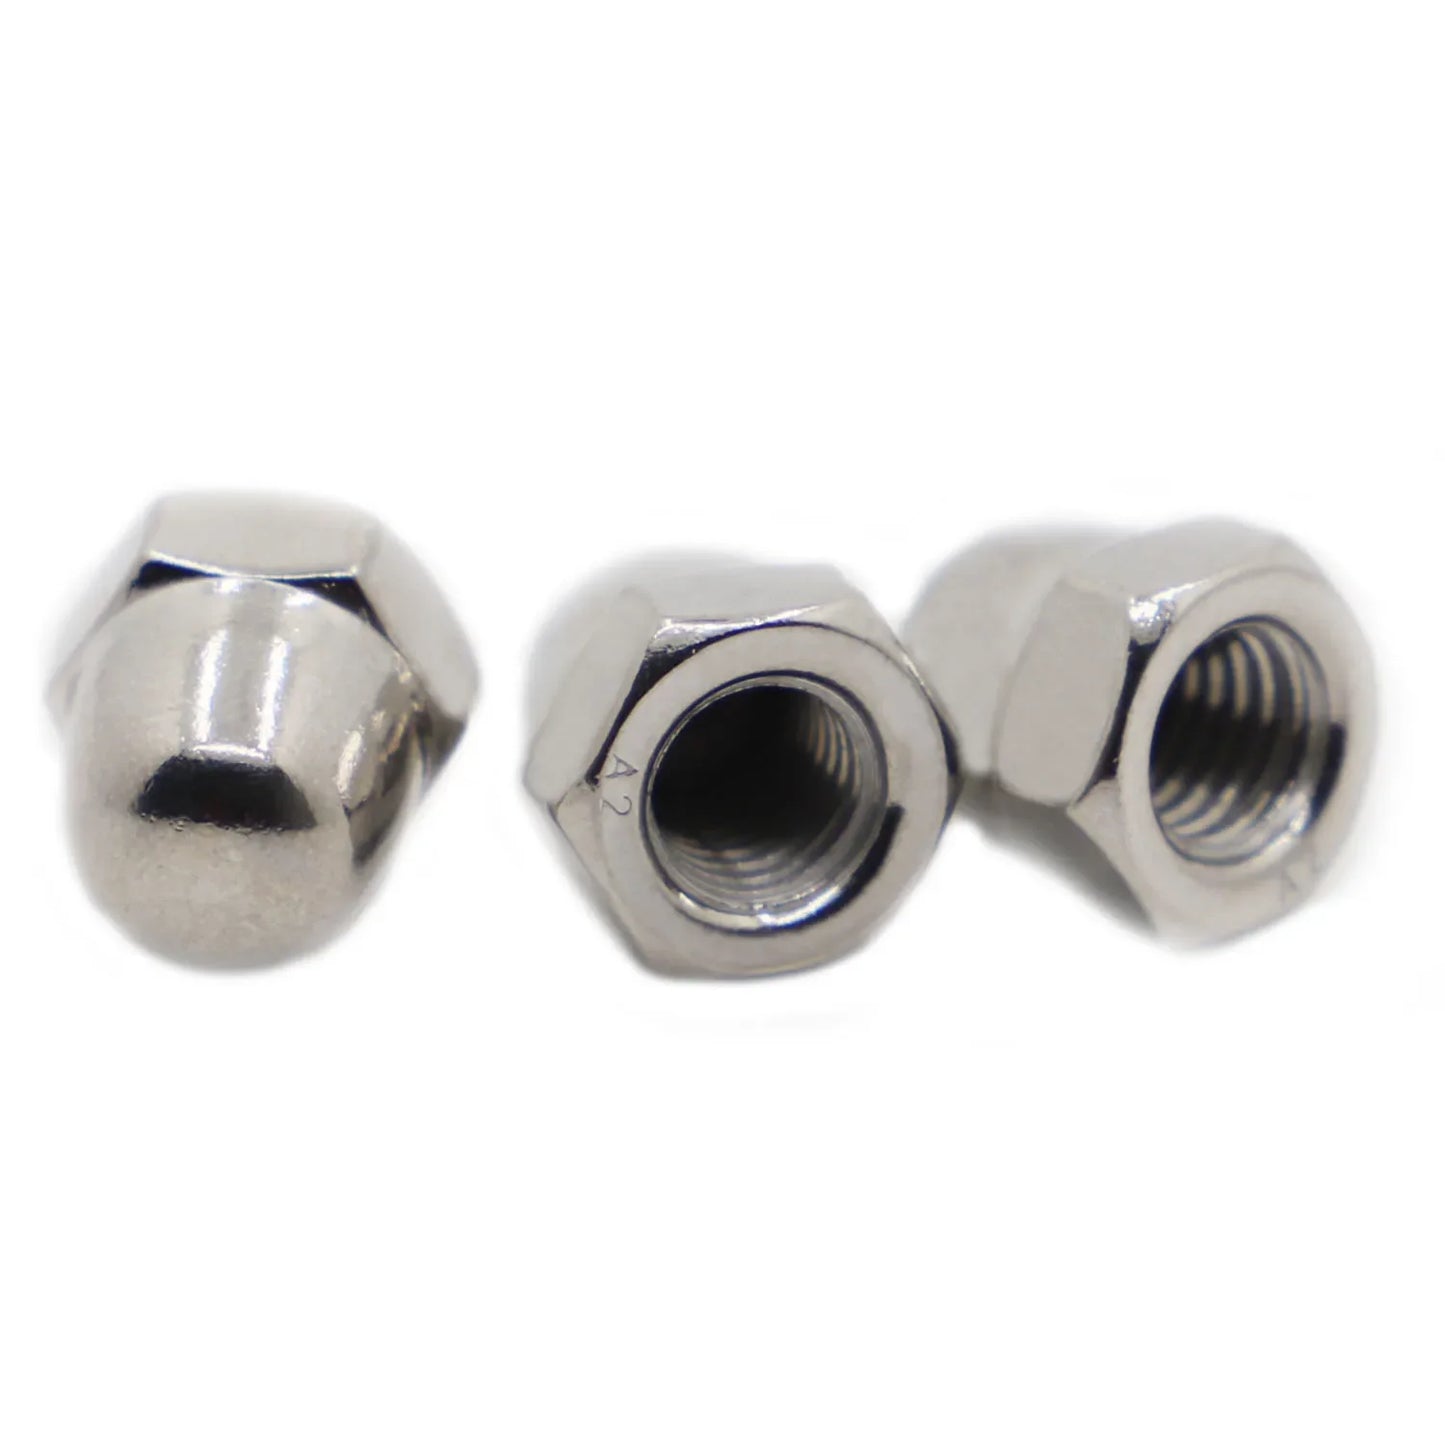 Stainless Steel Hex Cap Nut - Domed Nuts For Decrotive